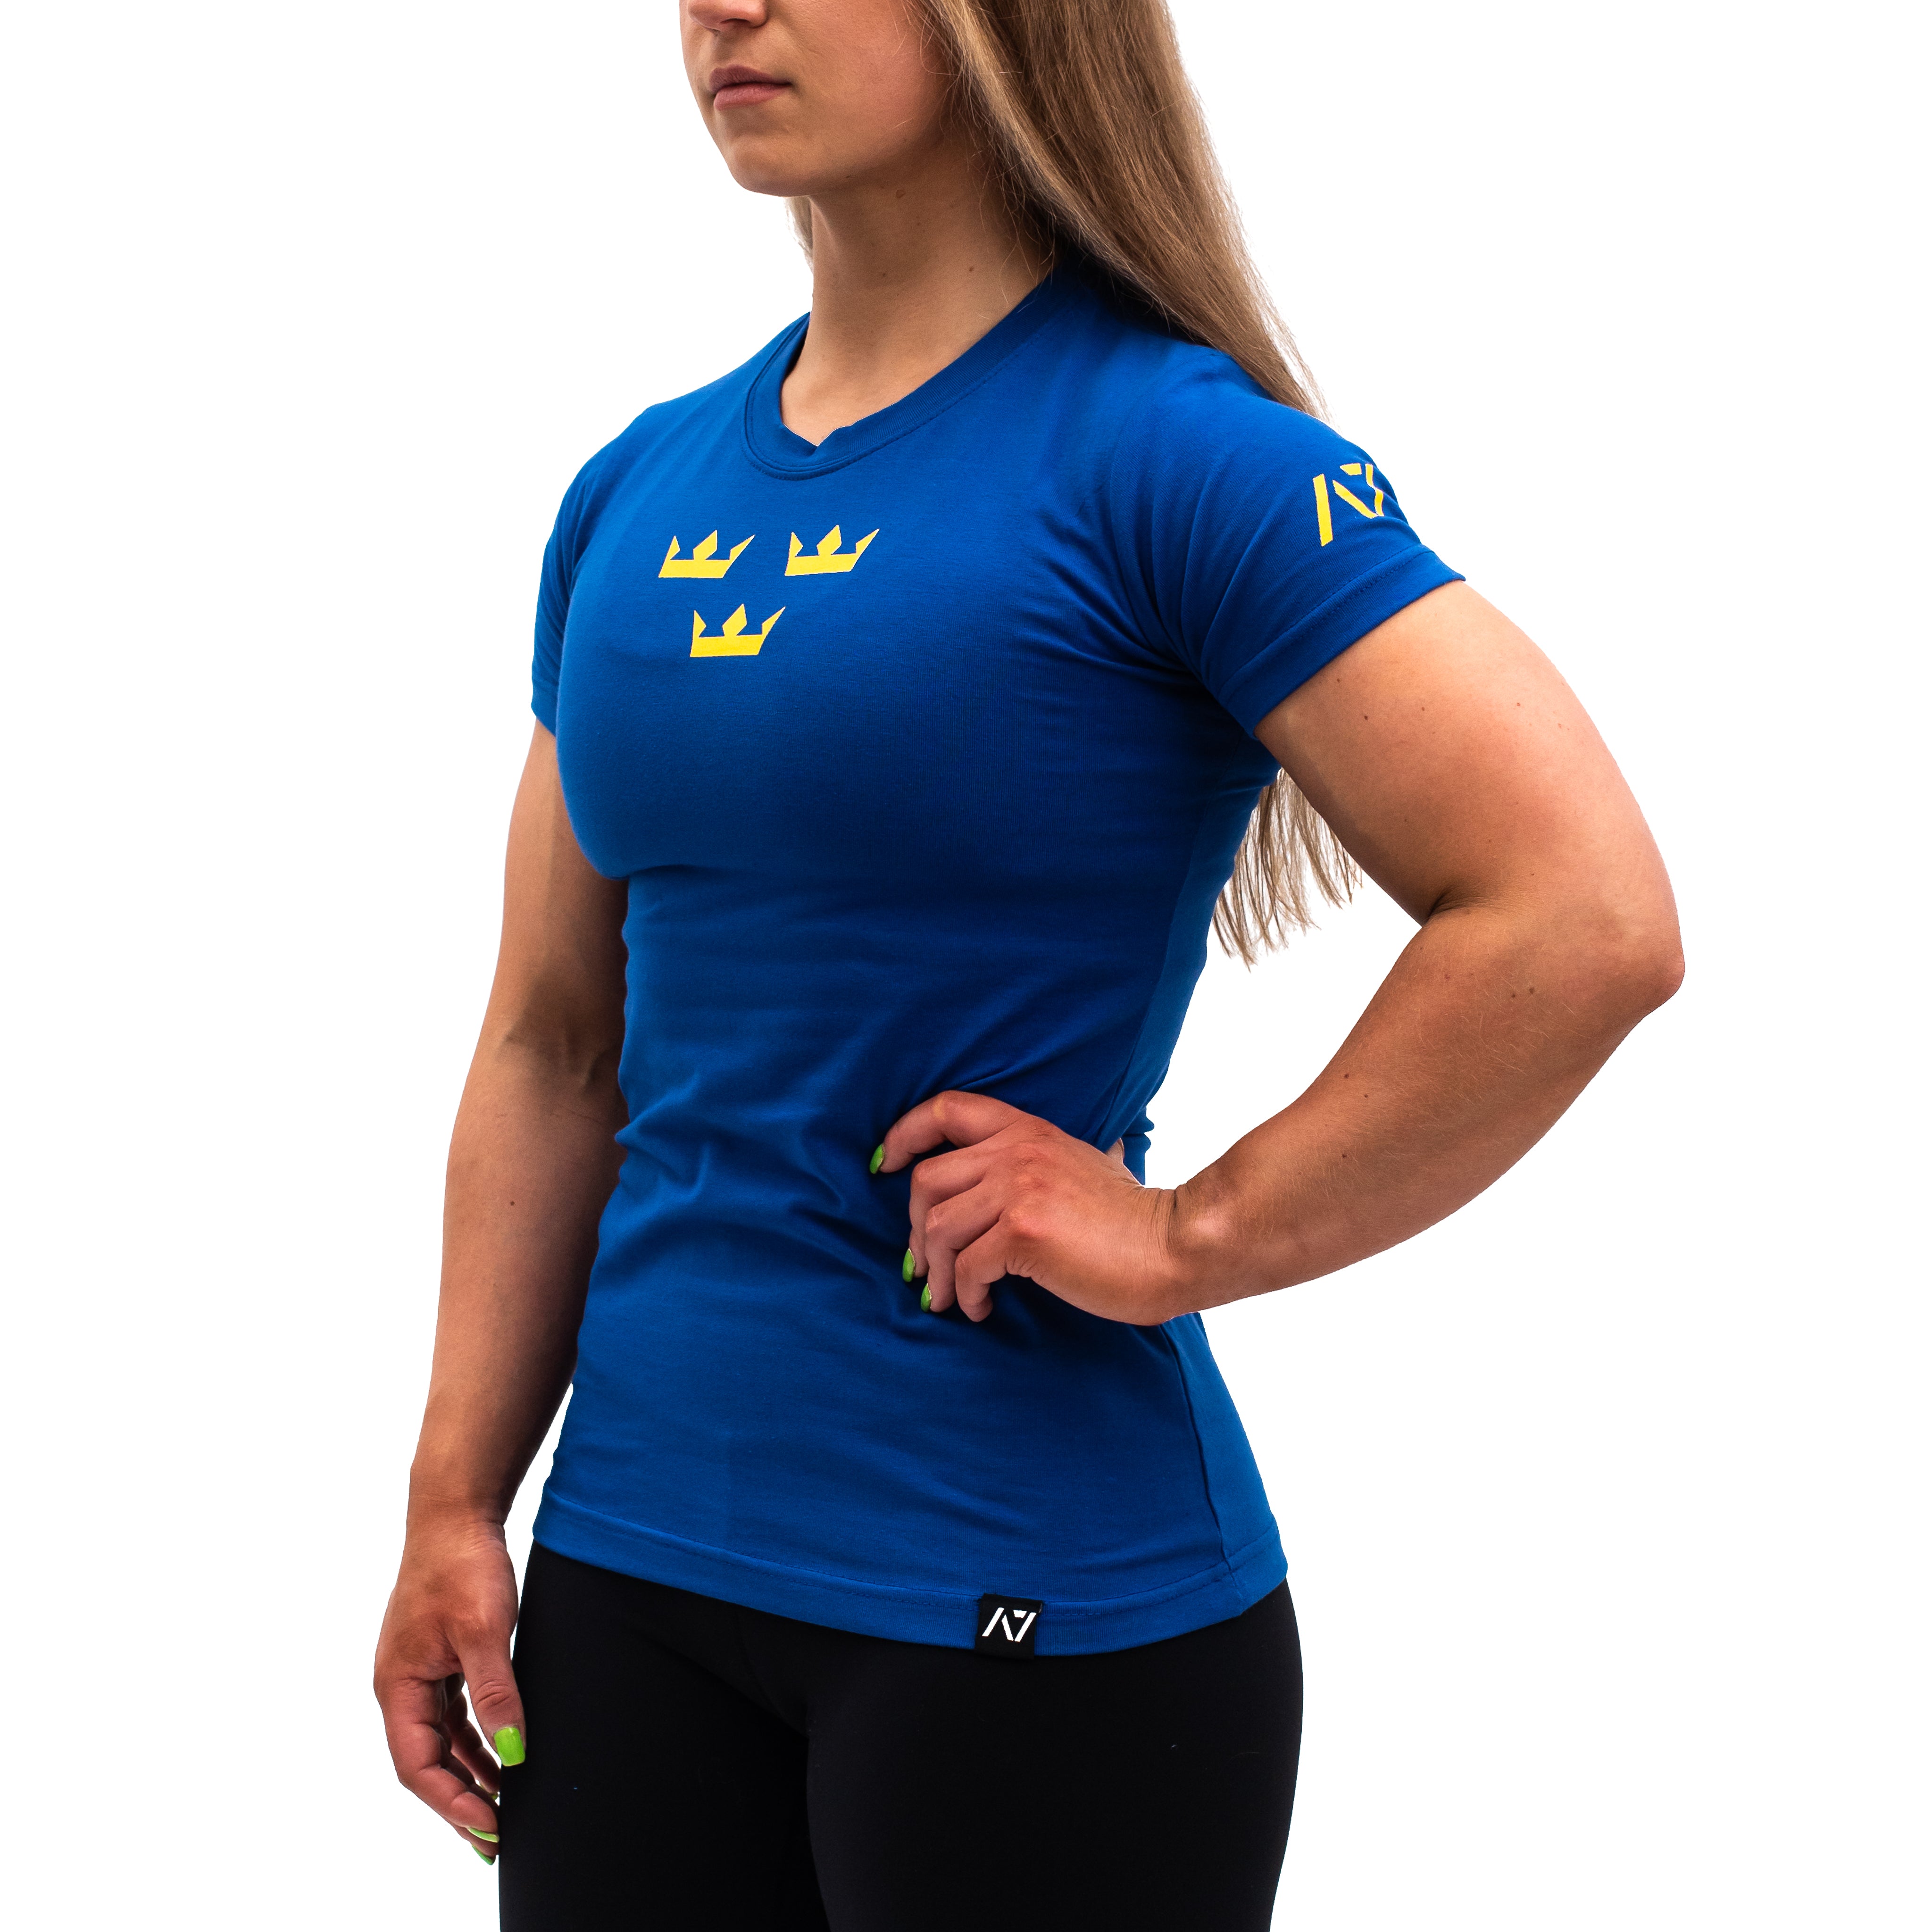  When you step on the platform and want to leave no doubt about your expectations and that you “Demand Greatness” on every lift, the A7 Sweden Meet Shirt lets everyone know you mean business. Now is your chance to celebrate another “country of strength” with this A7 Sweden Meet Tee. The A7 Sweden Meet Shirt is an essential in any IPF approved kit. You can buy this Sweden IPF Approved meet shirt from A7 UK or A7 Europe. 